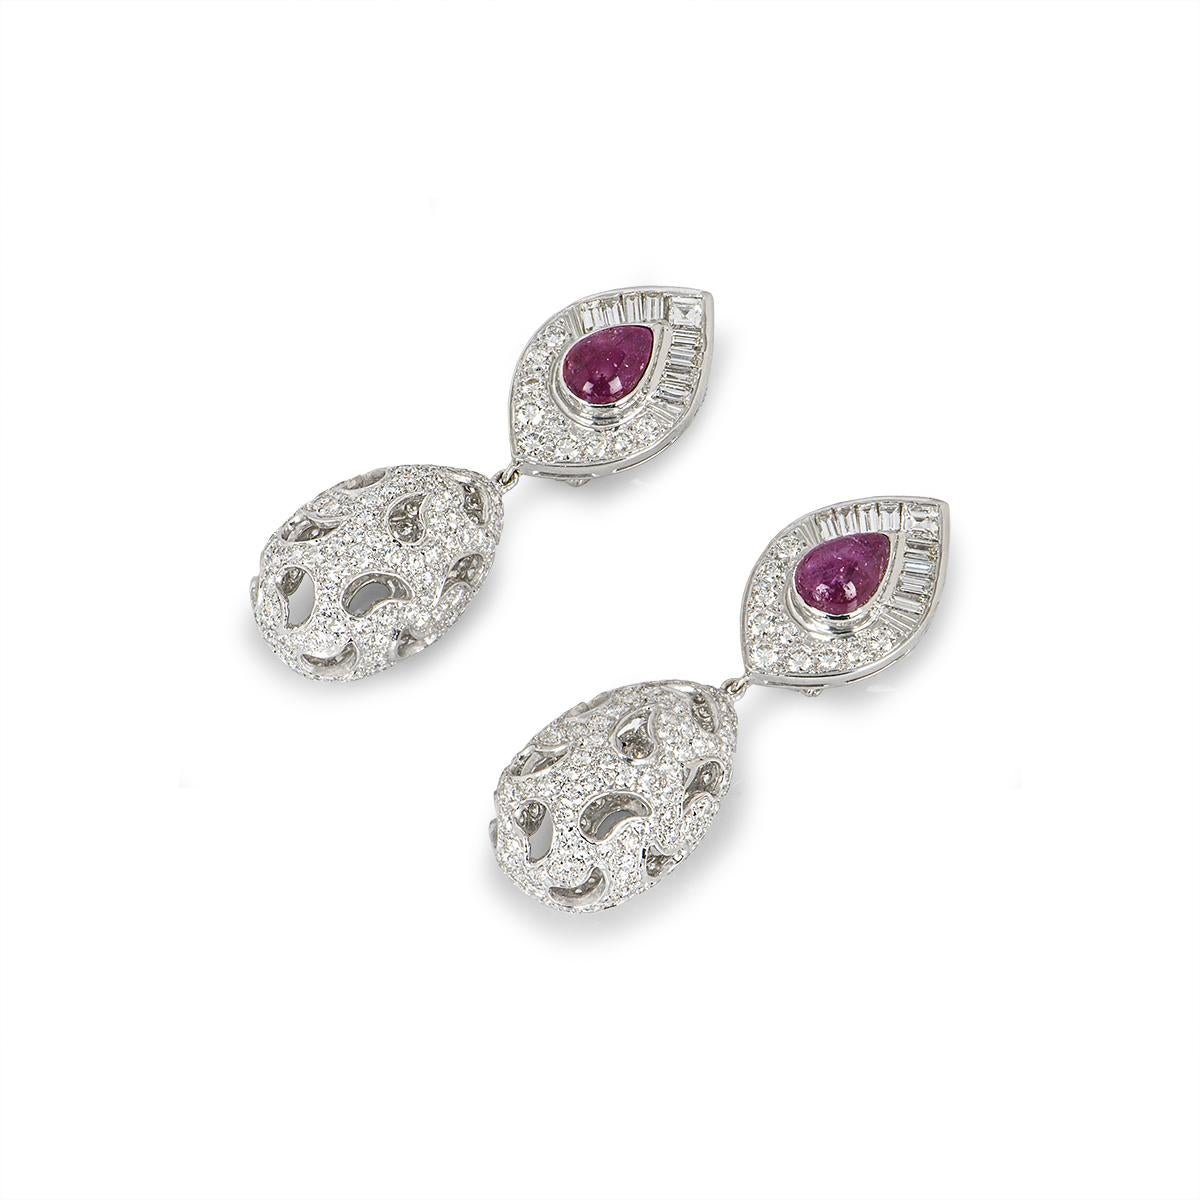 An exquisite pair of 18k white gold diamond and ruby drop earrings. The top part of the earrings features cabochon pear shaped rubies in a rub over setting set to the centre with an approximate combined weight of 4.00ct, surrounded by an asscher cut